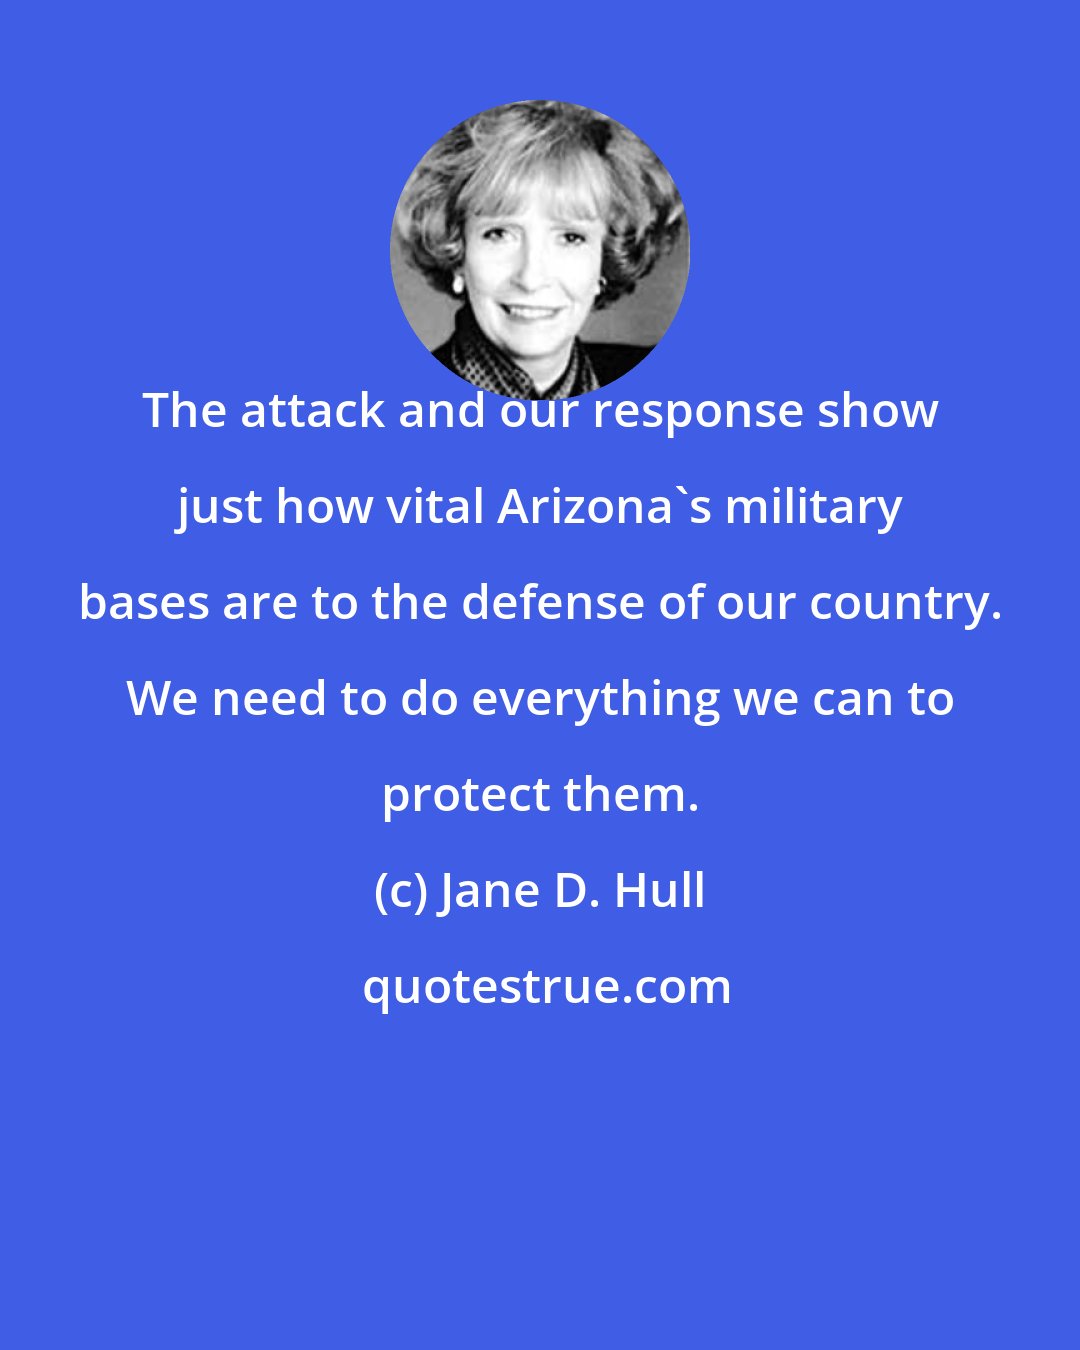 Jane D. Hull: The attack and our response show just how vital Arizona's military bases are to the defense of our country. We need to do everything we can to protect them.